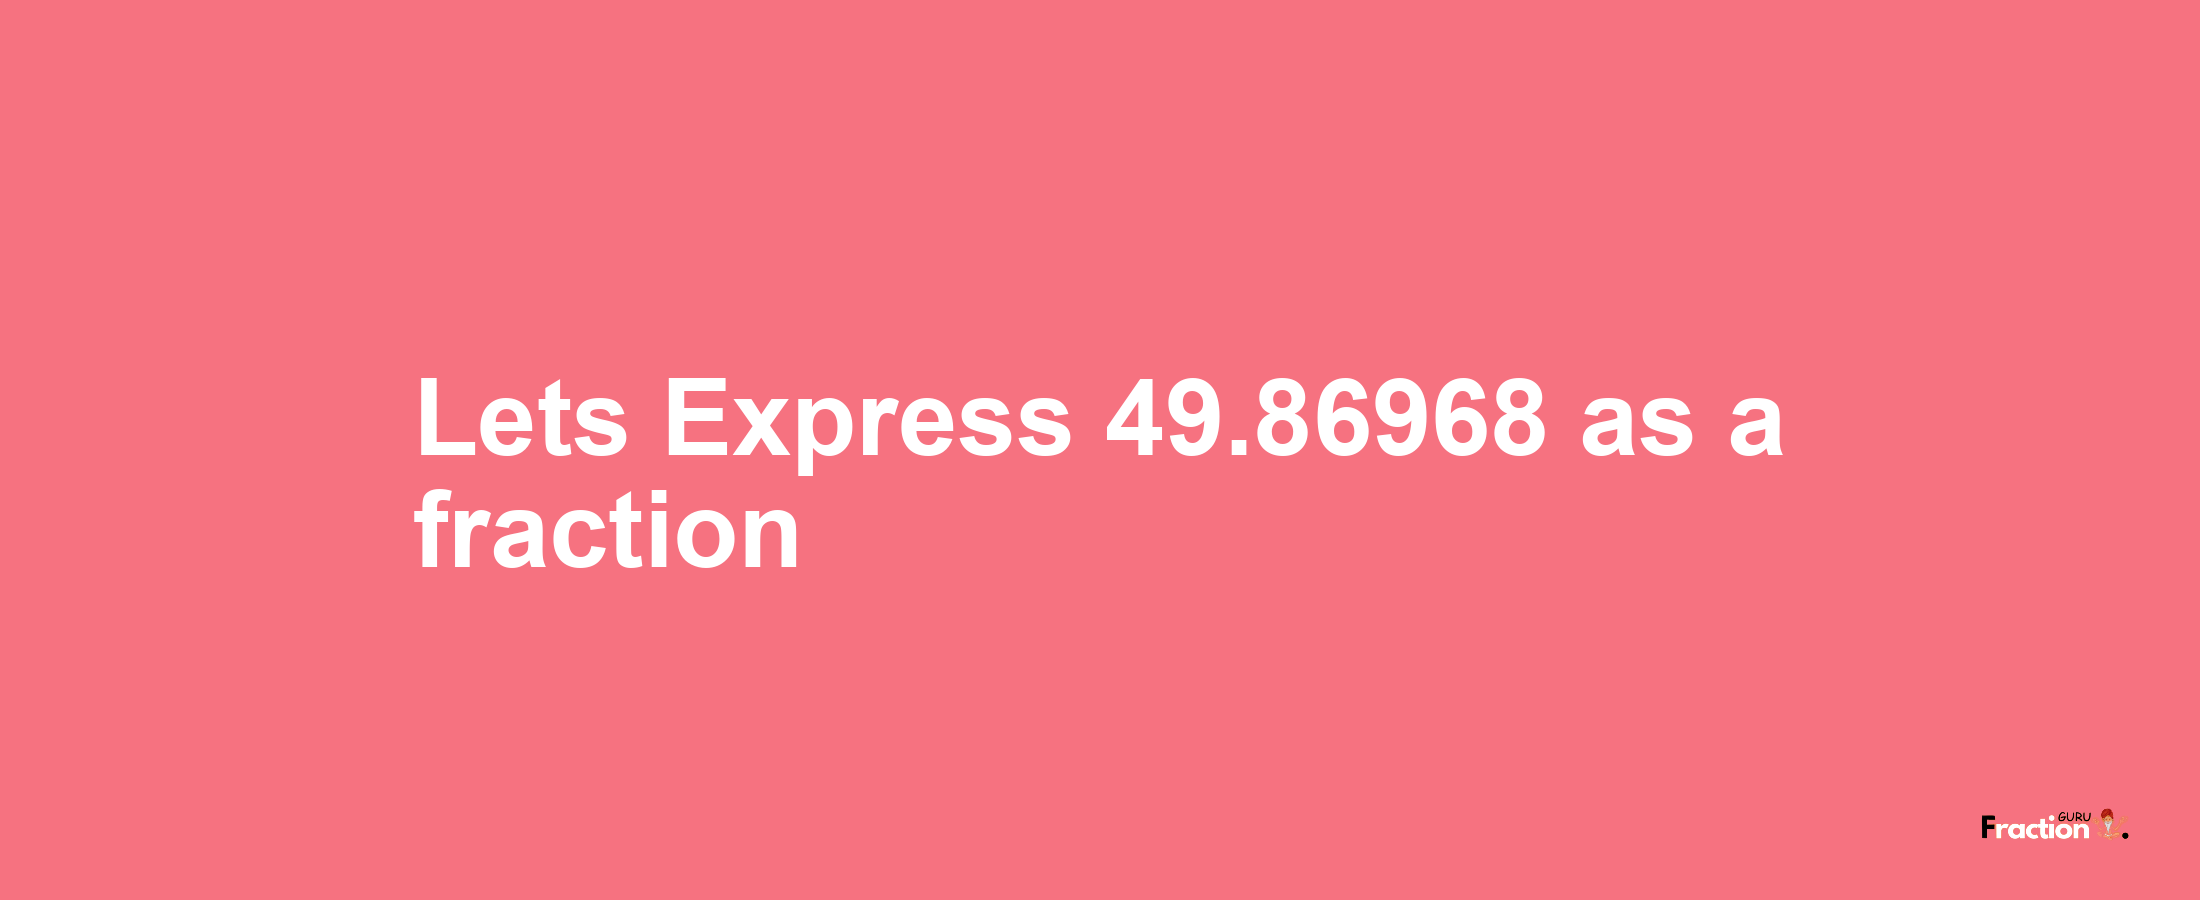 Lets Express 49.86968 as afraction